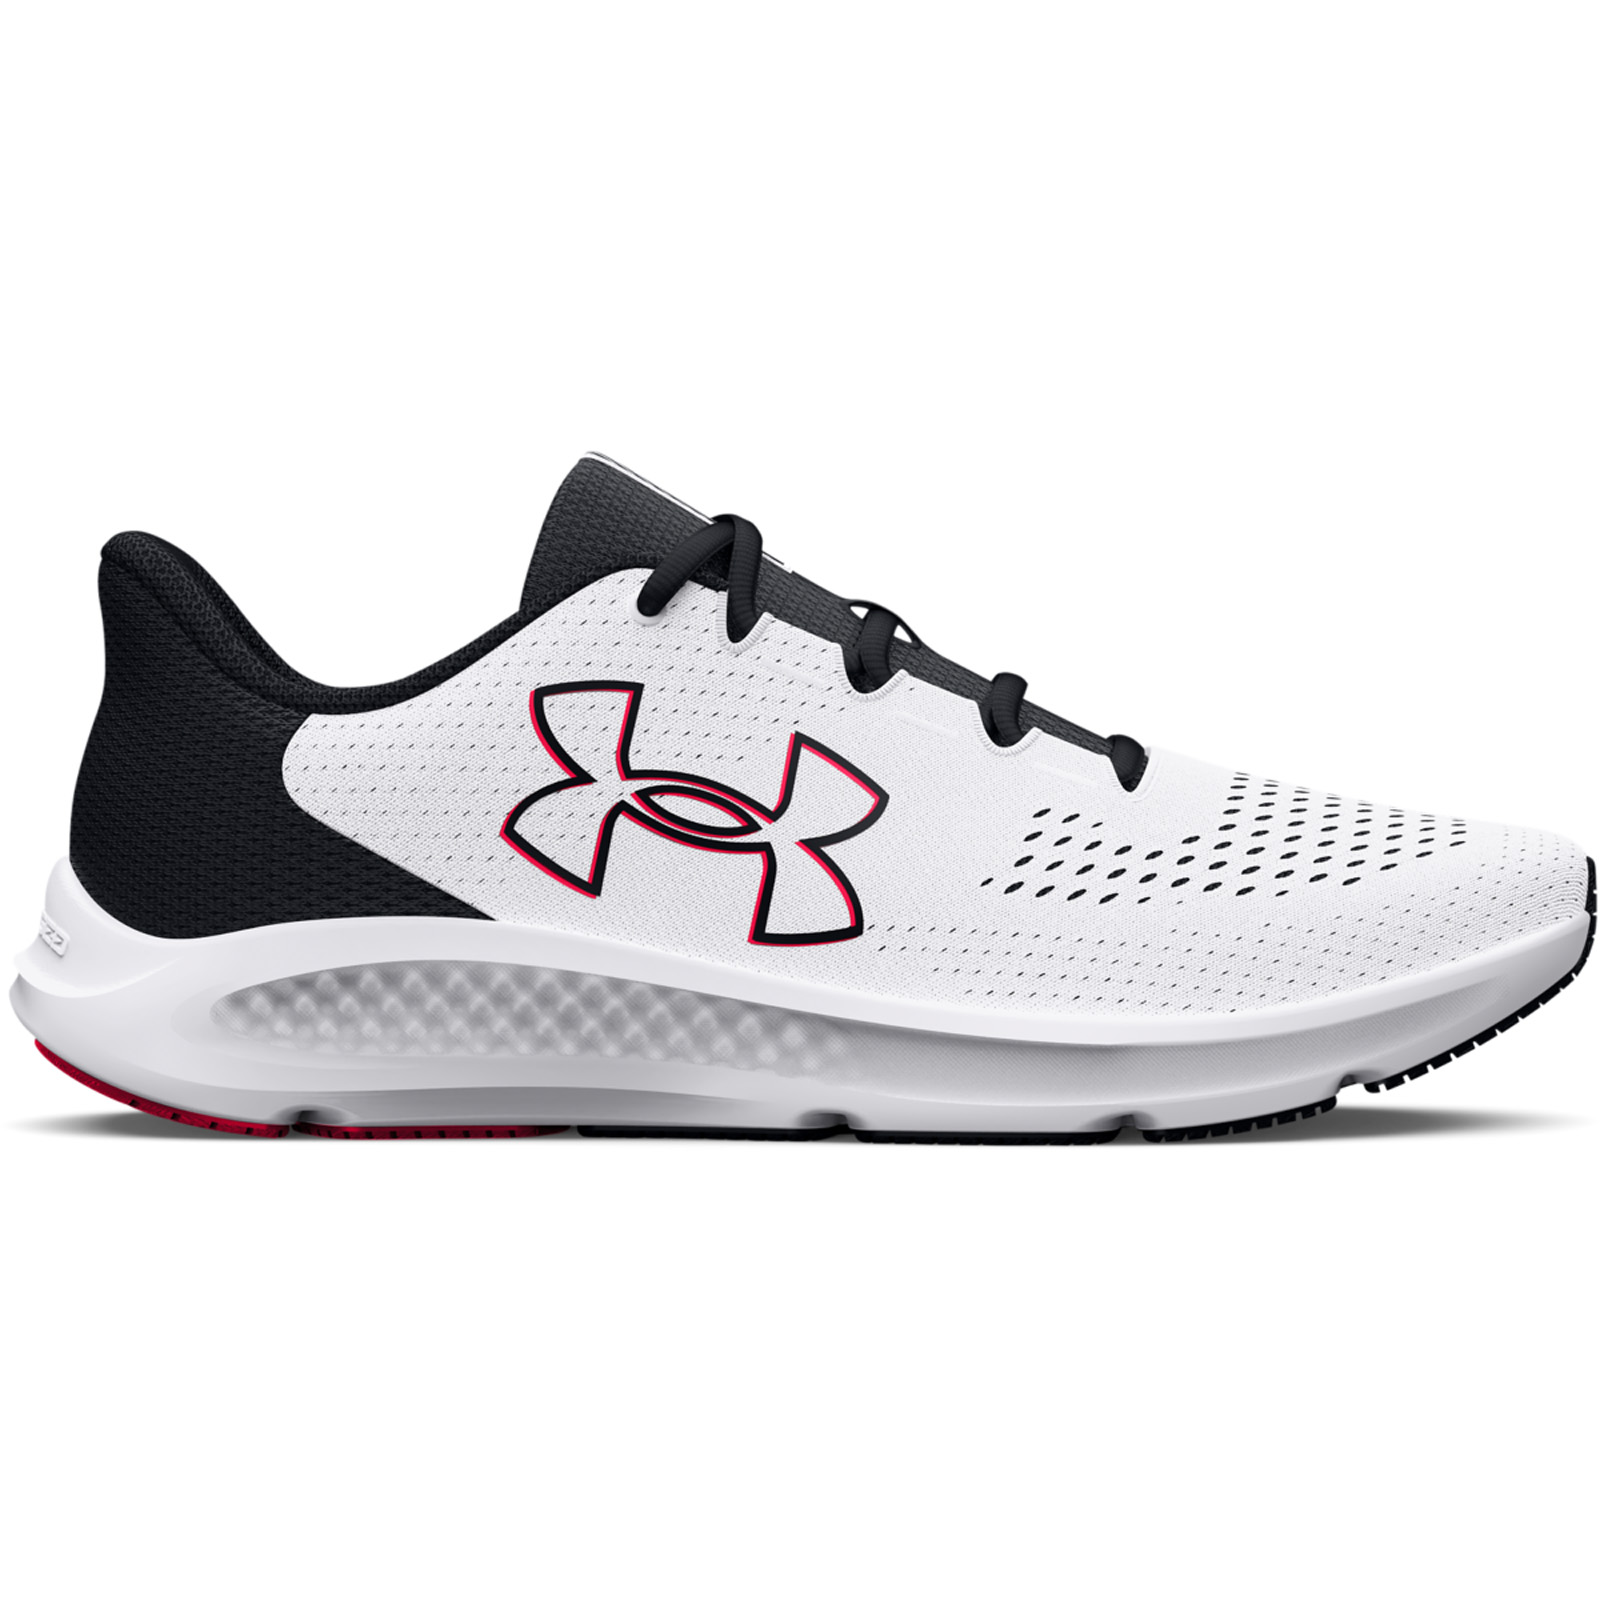 Under Armour - Men's UA Charged Pursuit 3 Big Logo Running Shoes - White/Black/Red Ανδρικά > Παπούτσια > Αθλητικά > Παπούτσι Low Cut